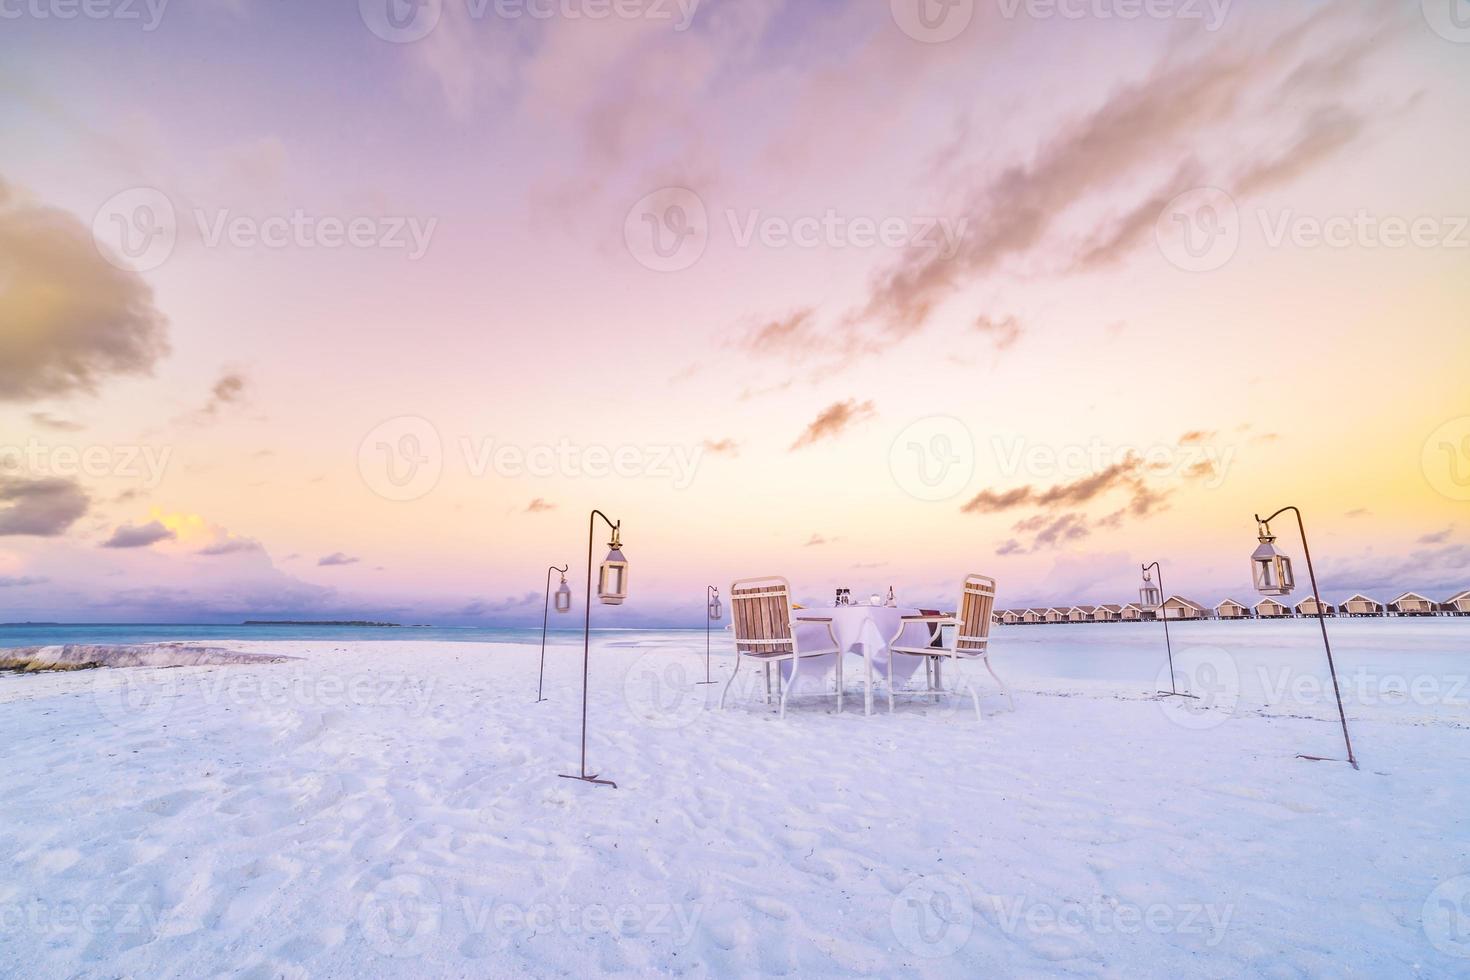 Seaside view under sunset light with dining table with infinity pool around. Romantic tropical getaway for two, couple concept. Chairs, food and romance. Luxury destination dining, honeymoon template photo